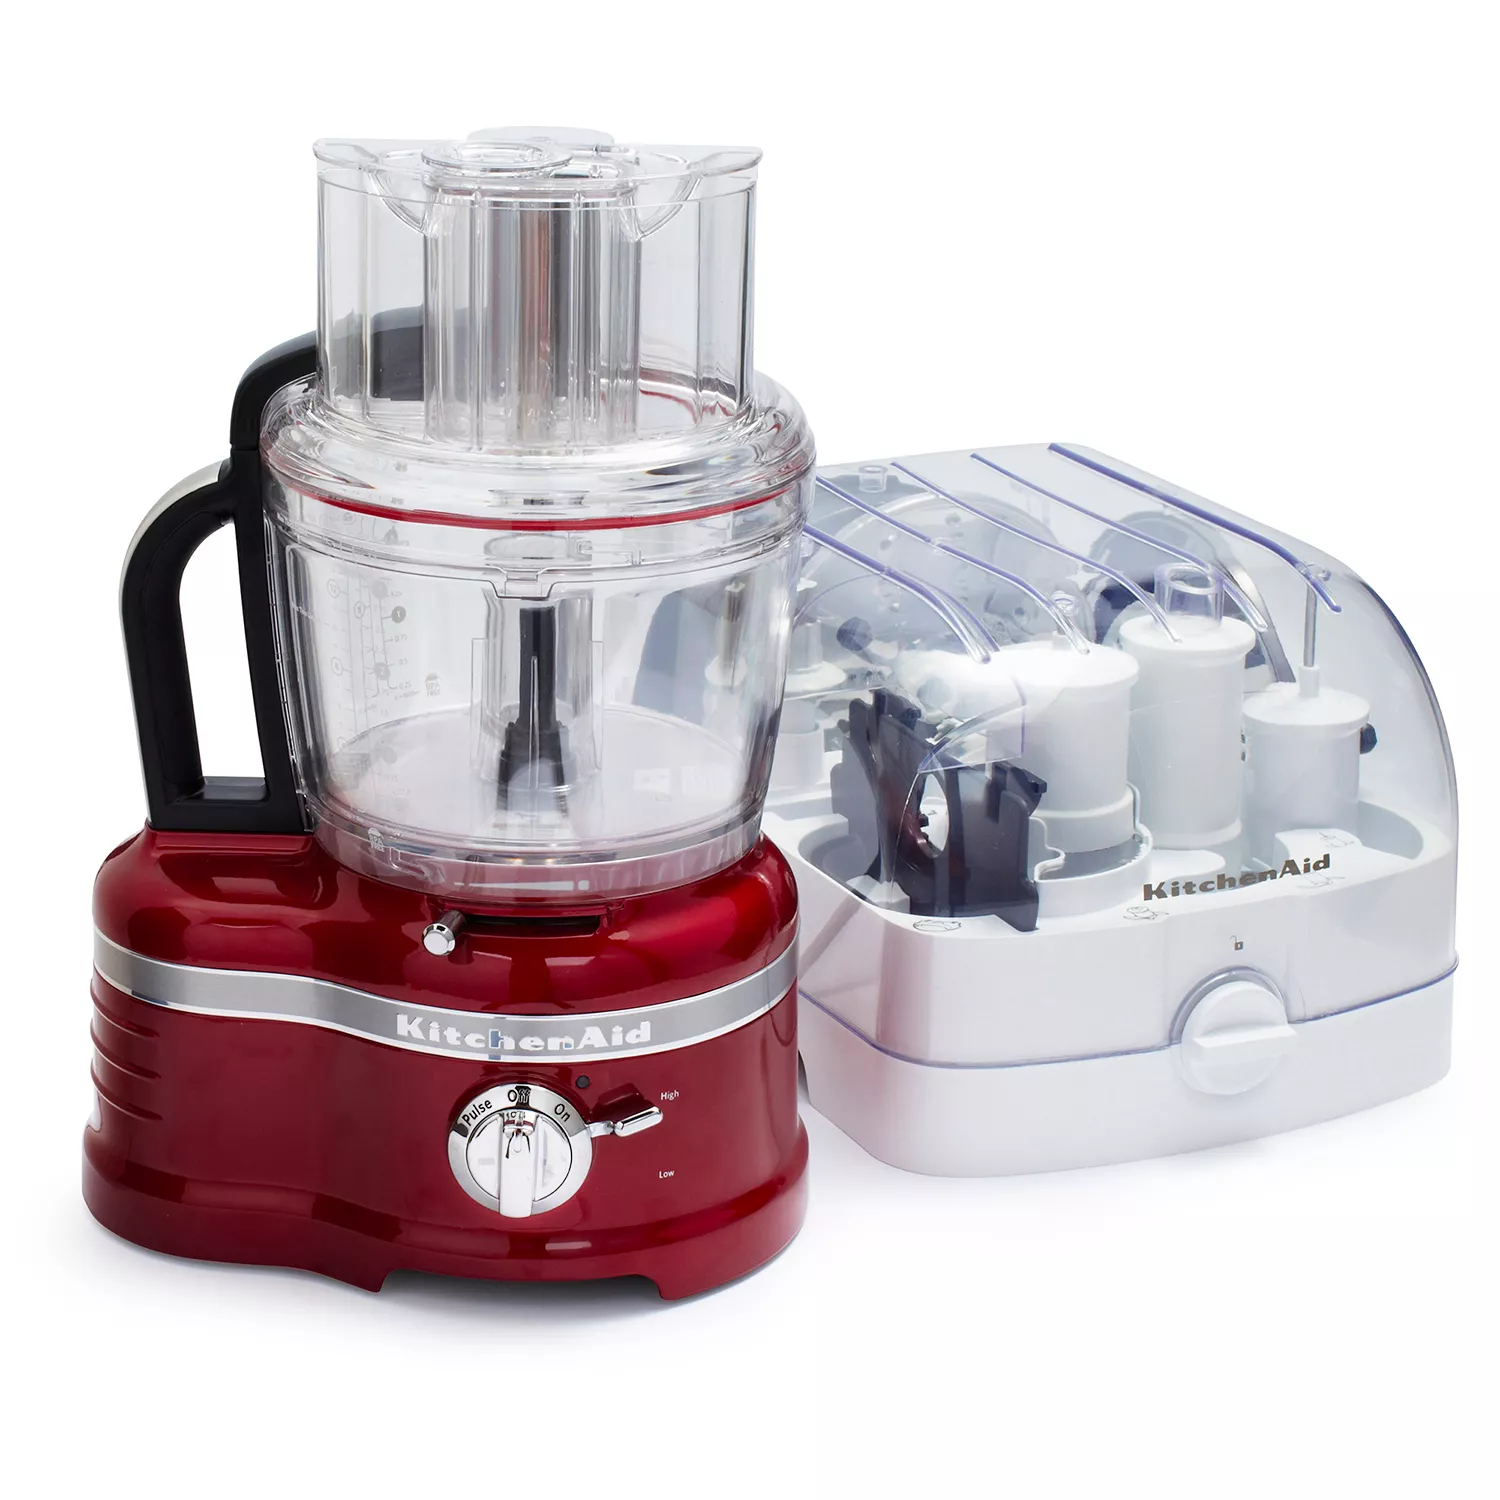 My Reliable Handheld KitchenAid Blender Is $15 Off for Cyber